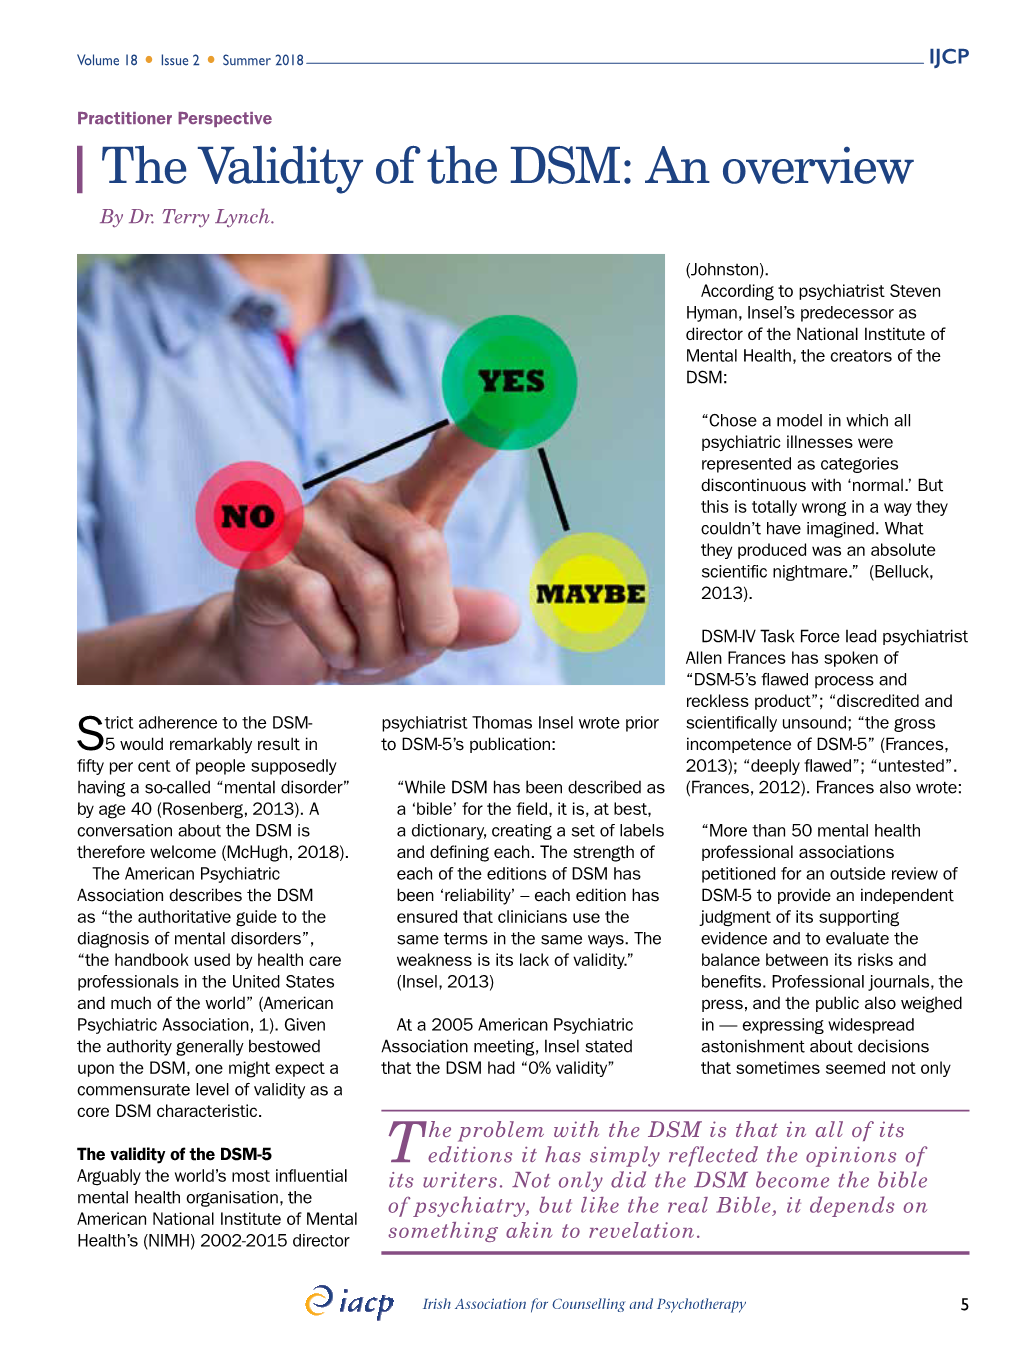 The Validity of the DSM: an Overview by Dr